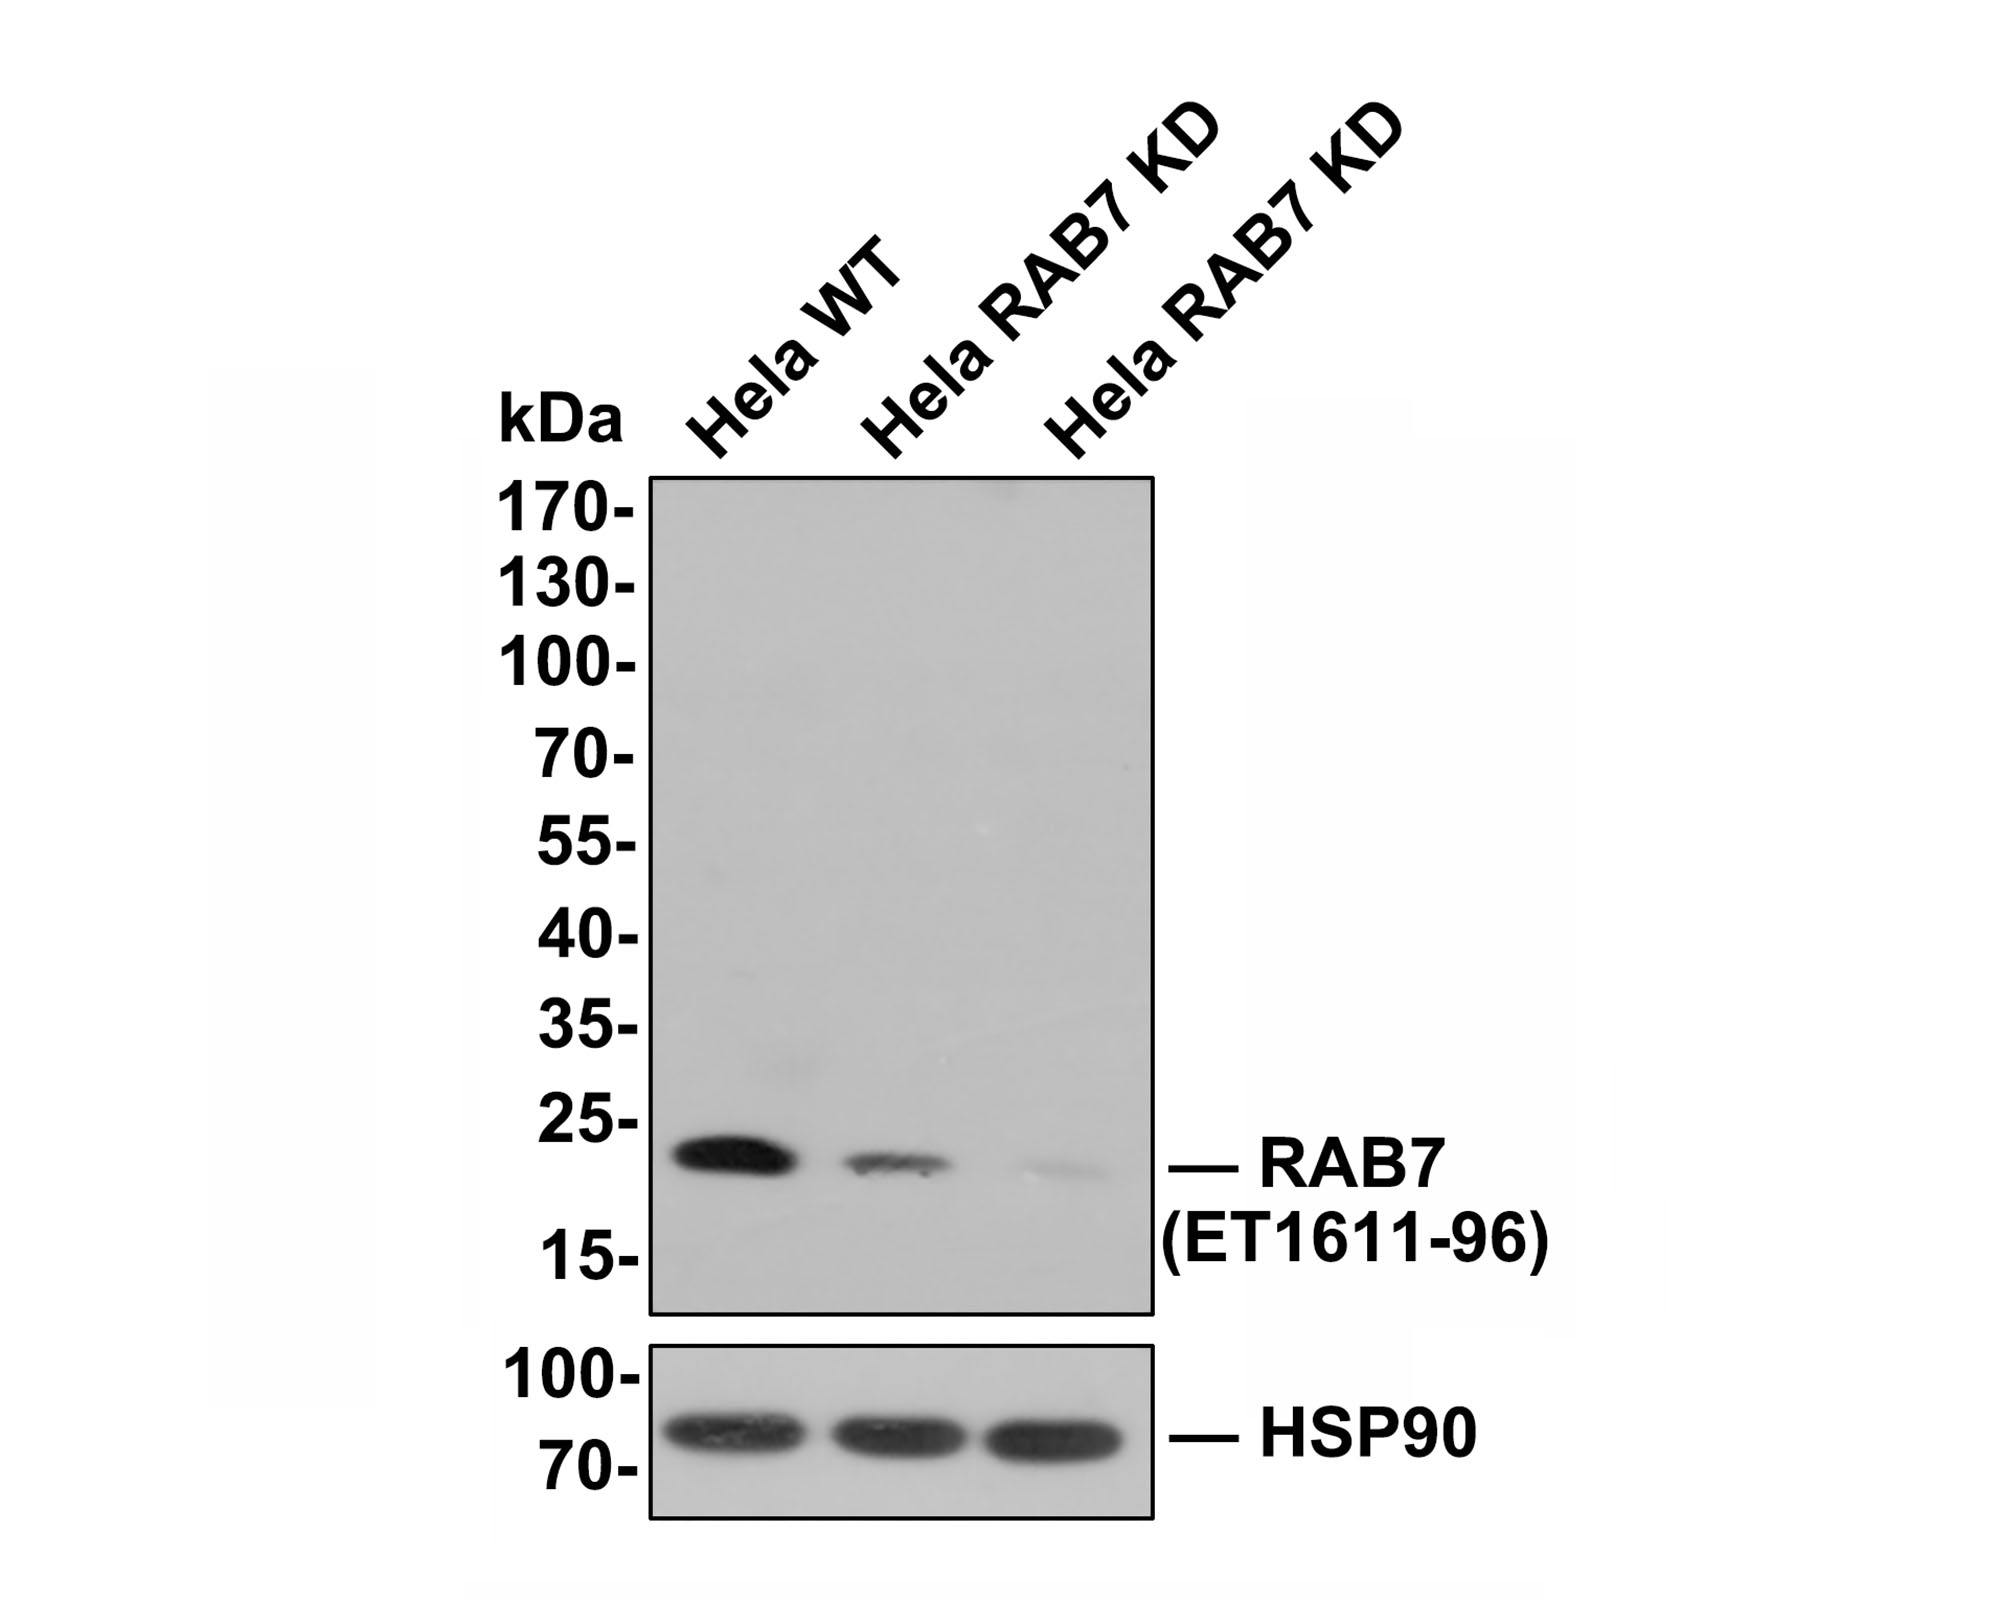 All lanes: Western blot analysis of RAB7 with anti-RAB7 antibody (ET1611-96) at 1:500 dilution.<br />
Lane 1: Wild-type Hela whole cell lysate (10 µg).<br />
Lane 2/3: RAB7 knockdown Hela whole cell lysate (10 µg).<br />
<br />
ET1611-96 was shown to specifically react with RAB7 in wild-type Hela cells. Weakened bands were observed when RAB7 knockdown samples were tested. Wild-type and RAB7 knockdown samples were subjected to SDS-PAGE. Proteins were transferred to a PVDF membrane and blocked with 5% NFDM in TBST for 1 hour at room temperature. The primary antibody (ET1611-96, 1:500) was used in 5% BSA at room temperature for 2 hours. Goat Anti-Rabbit IgG-HRP Secondary Antibody (HA1001) at 1:300,000 dilution was used for 1 hour at room temperature.